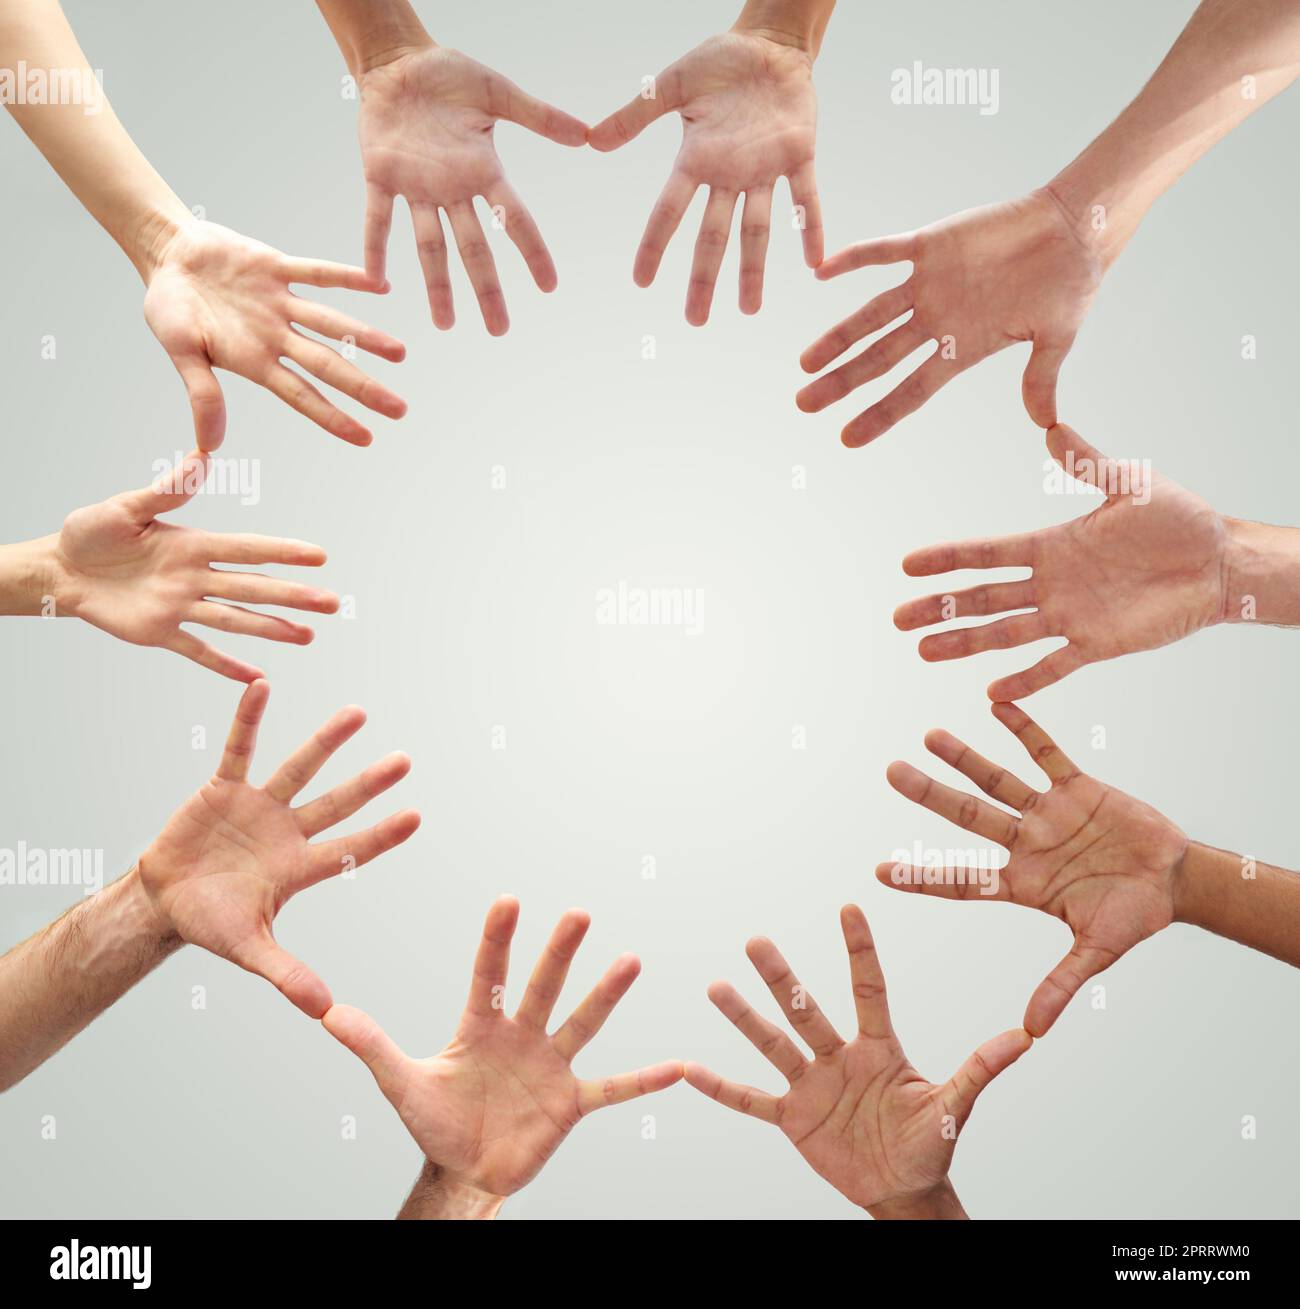 Many hands make light work. Low angle shot of hands in a circle forming a circle. Stock Photo